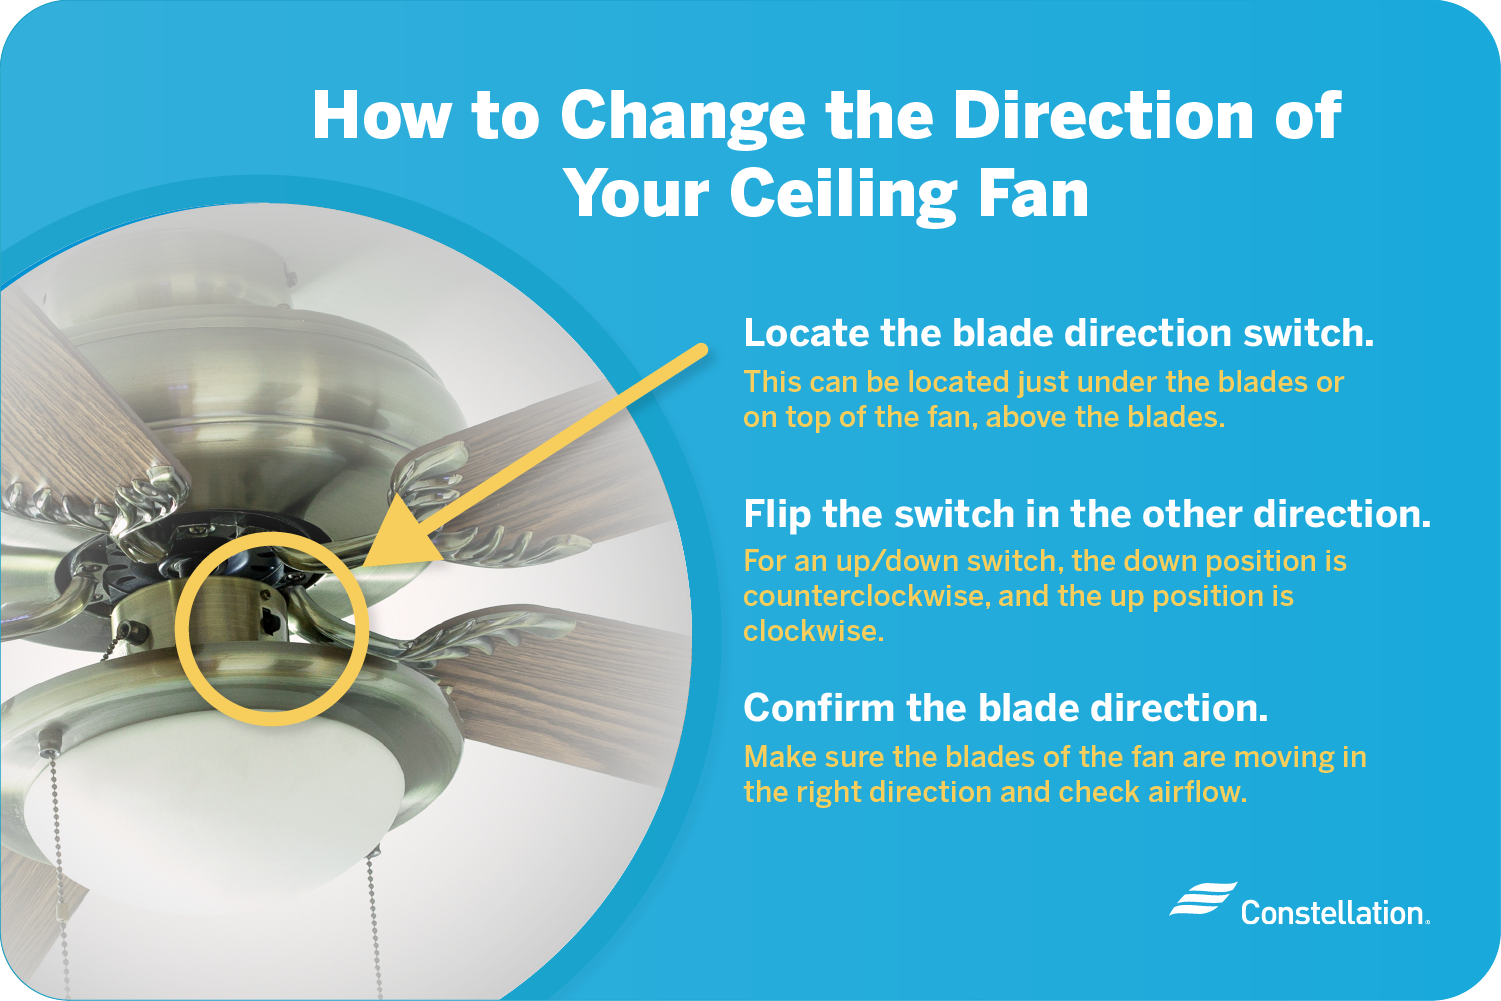 To change the direction of a ceiling fan you must locate the blade direction switch, flip the switch in the other direction, and then confirm the correct blade direction.